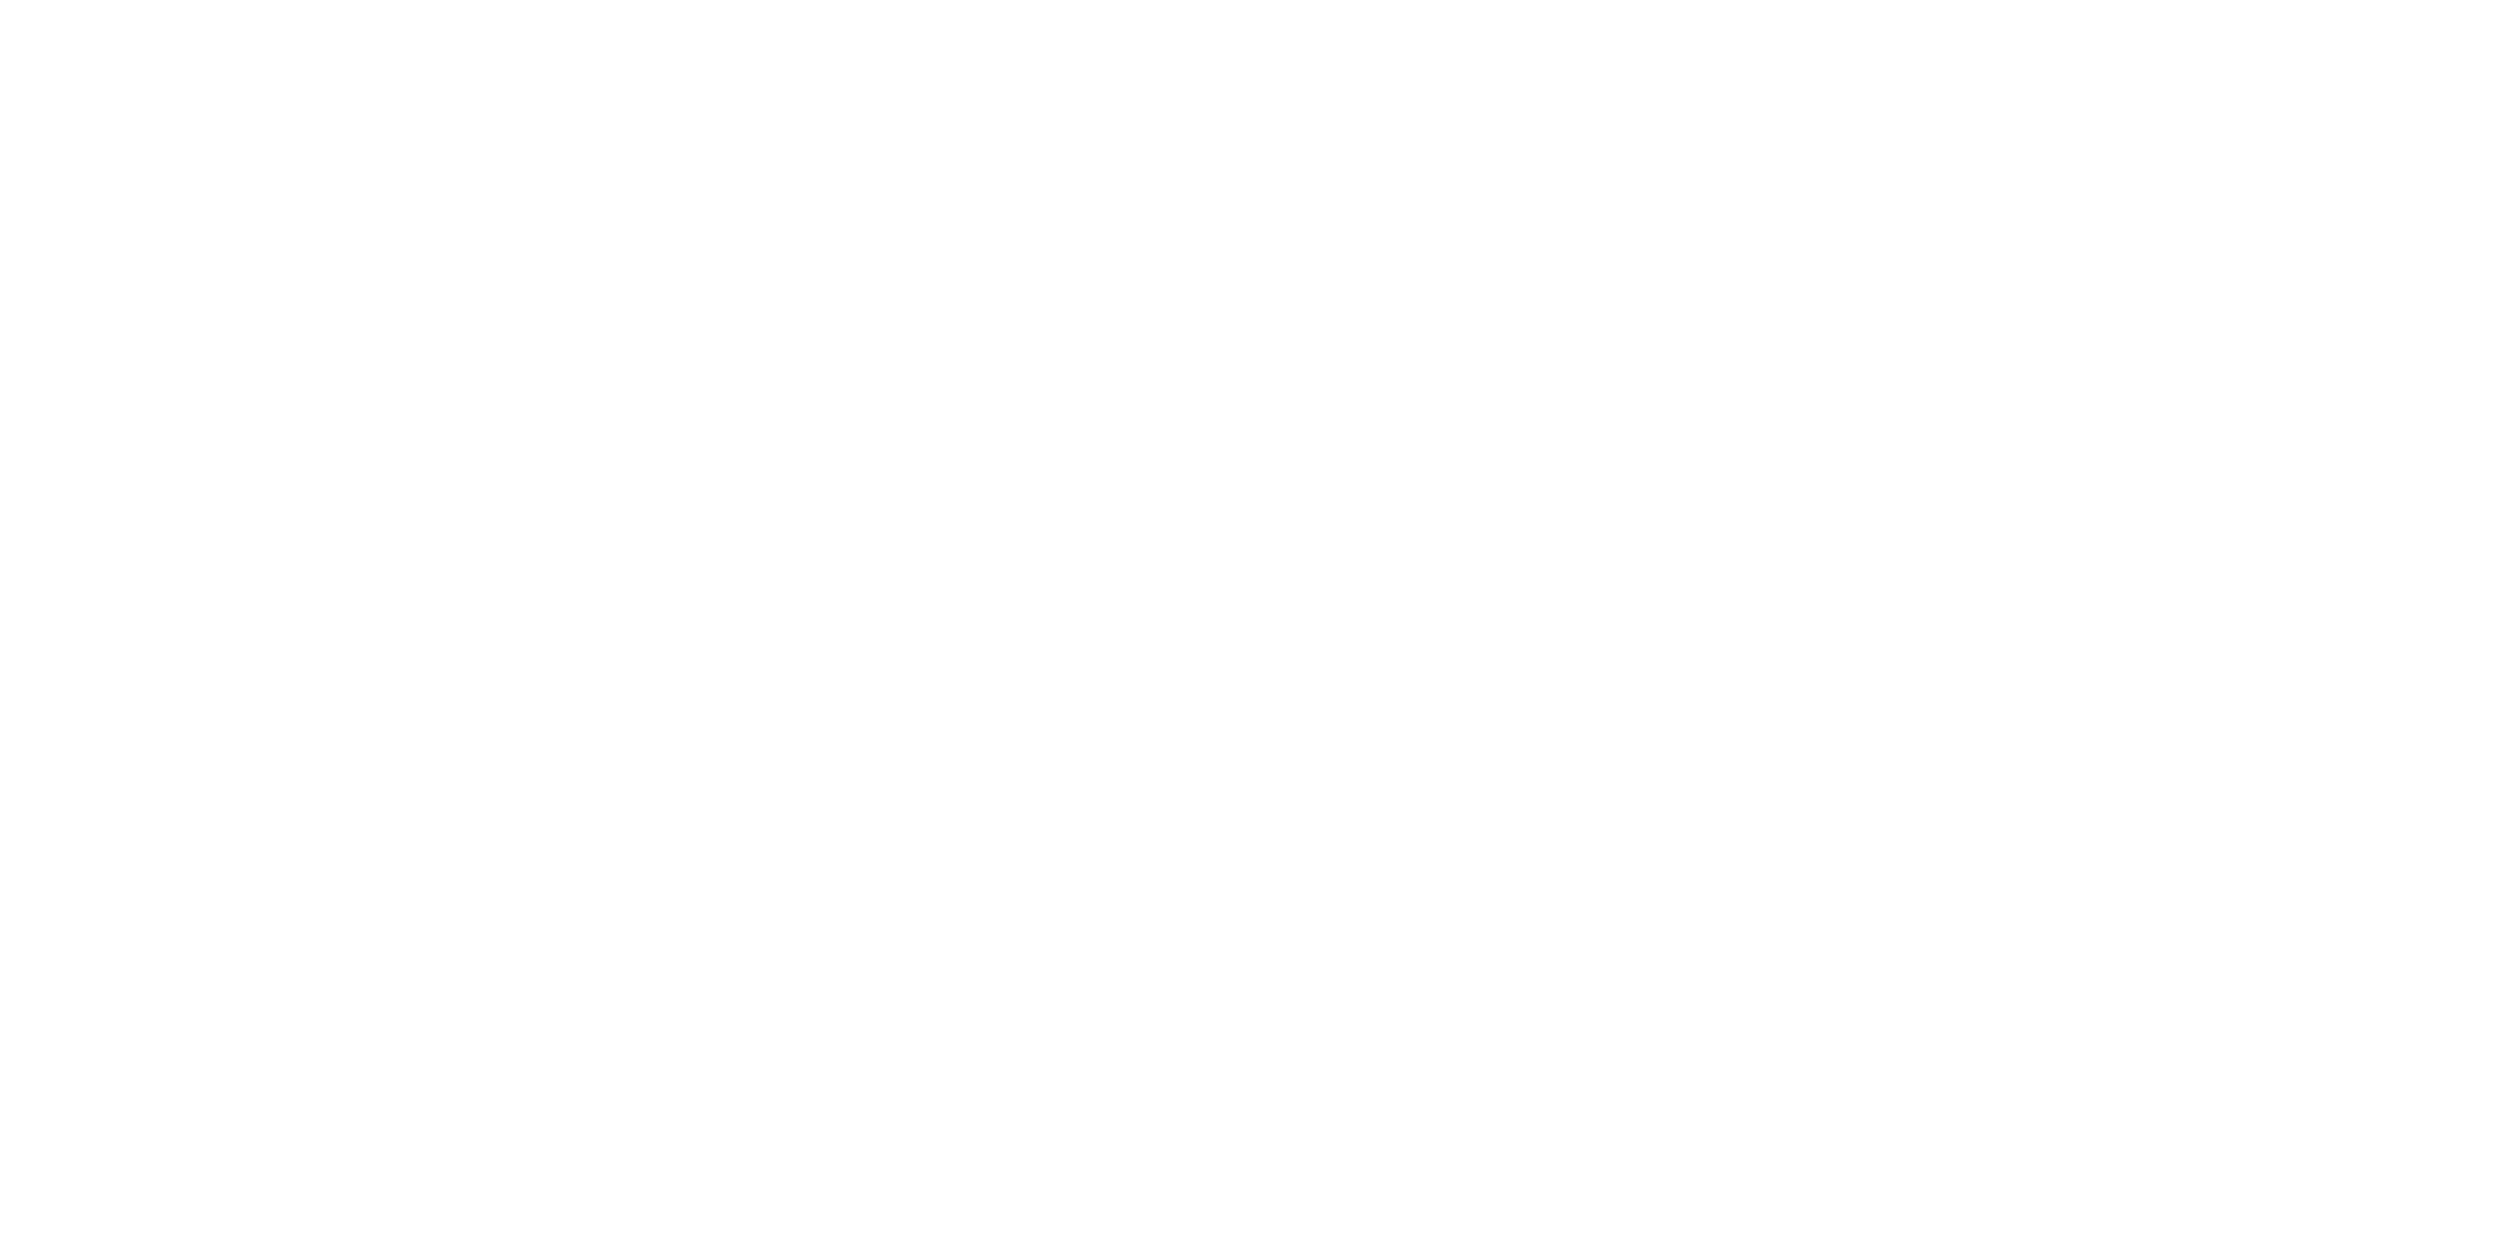 Co-Pilotes Experts-comptables